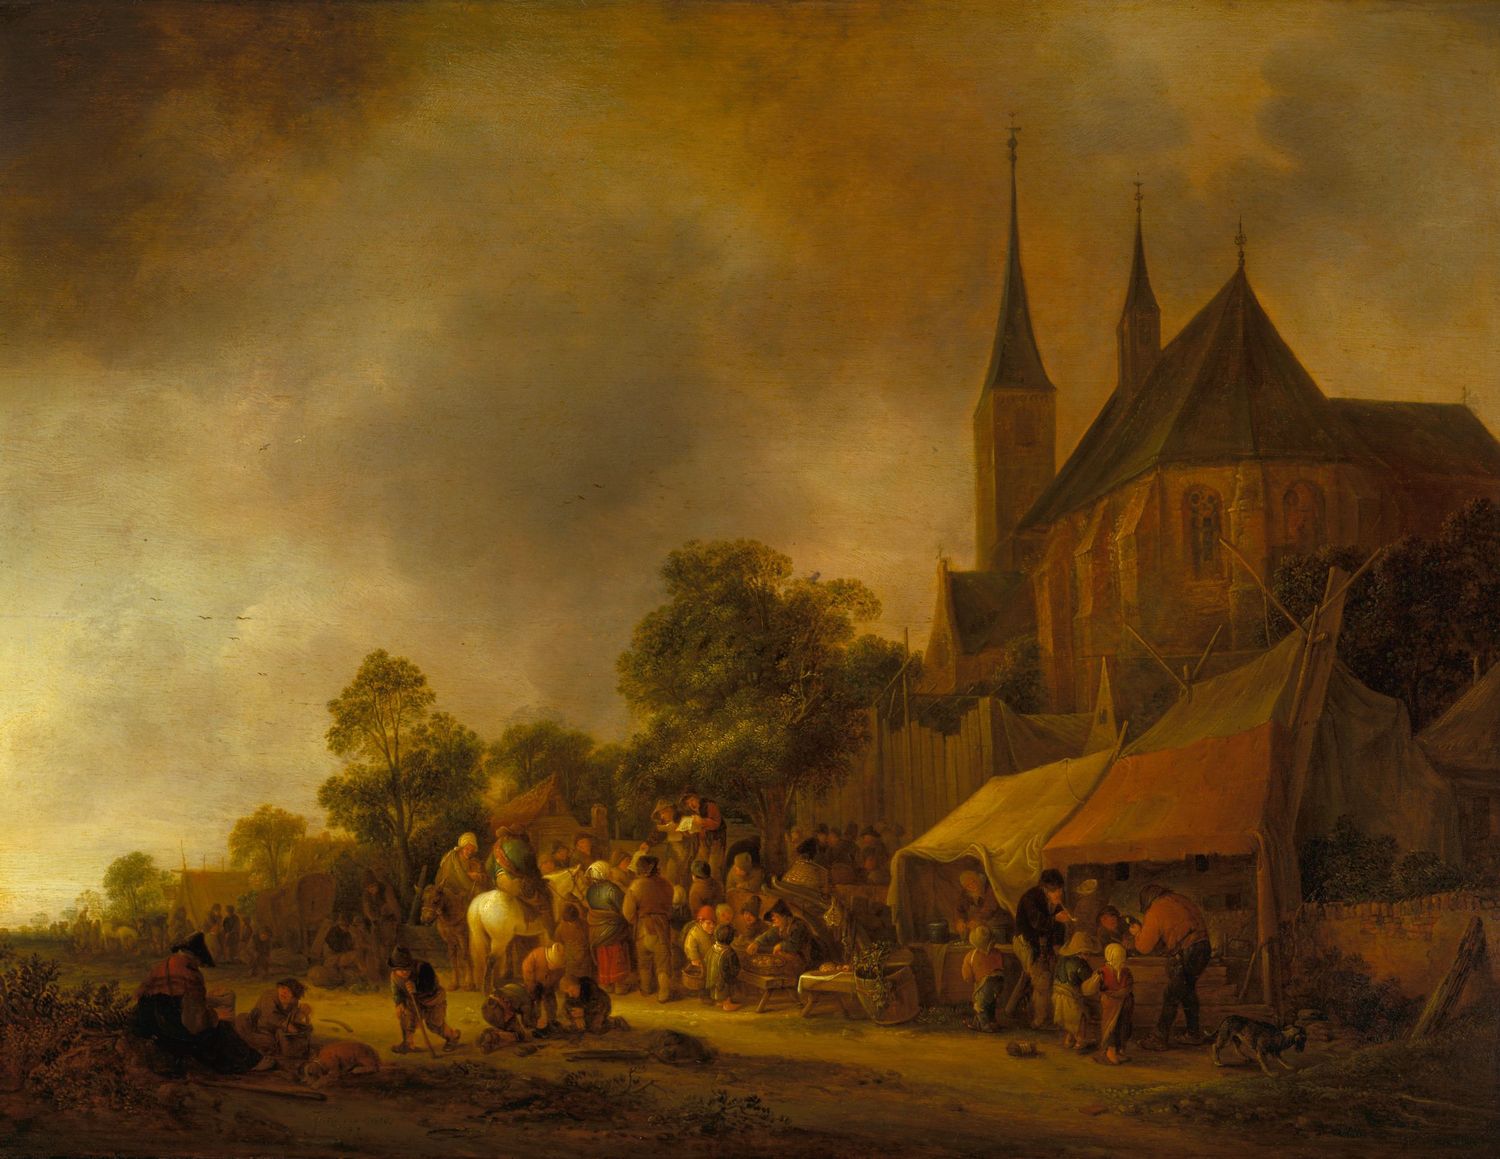 Heavily varnished painting showing a village scene